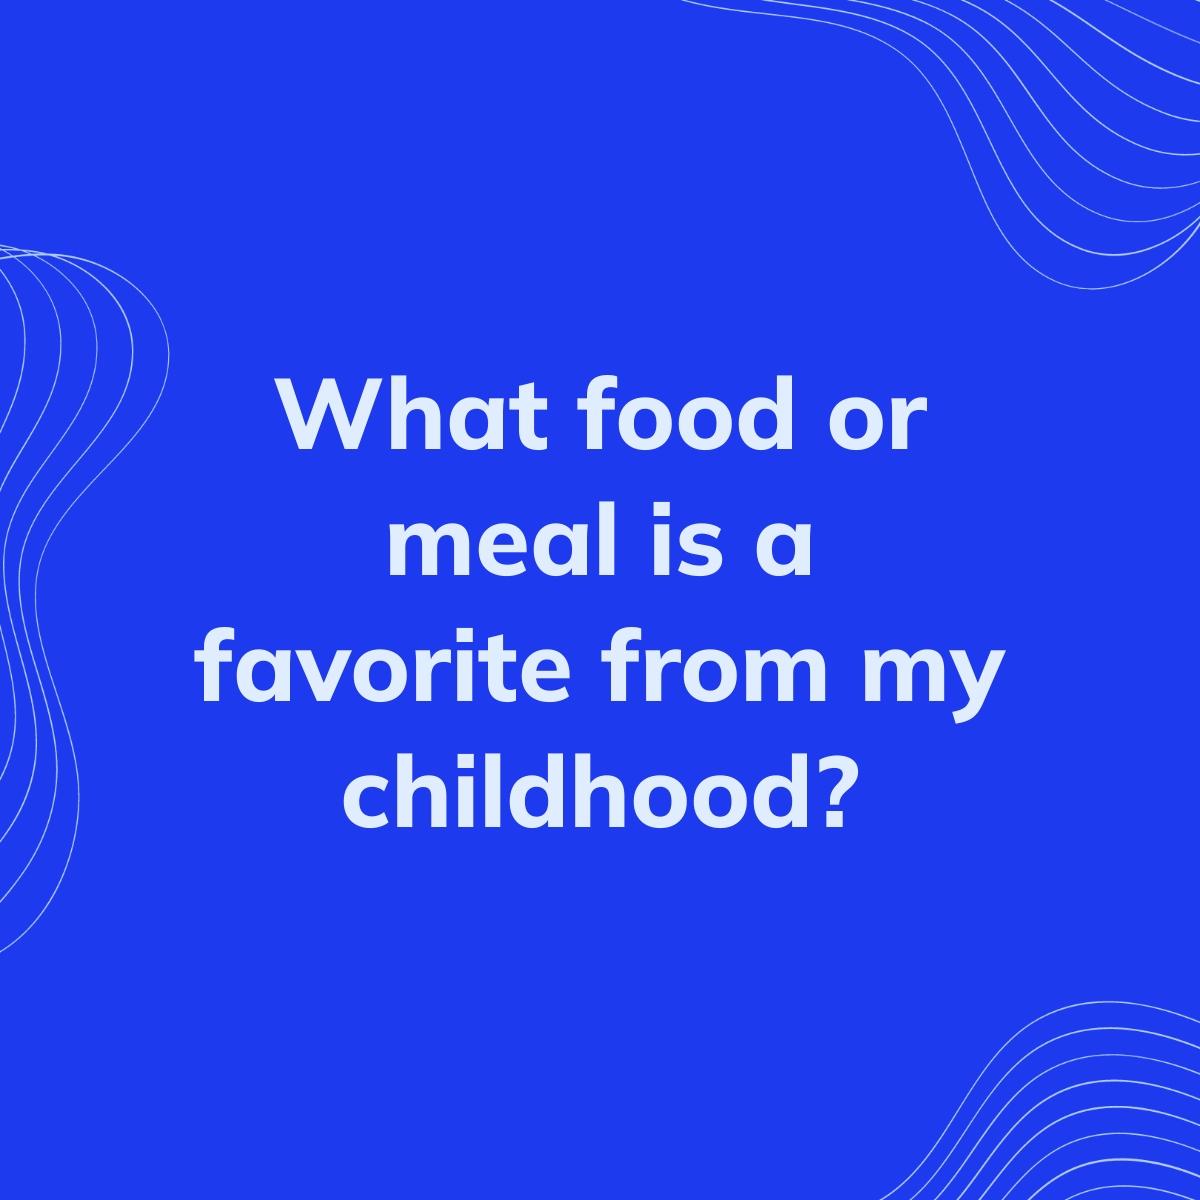 Journal Prompt: What food or meal is a favorite from my childhood?